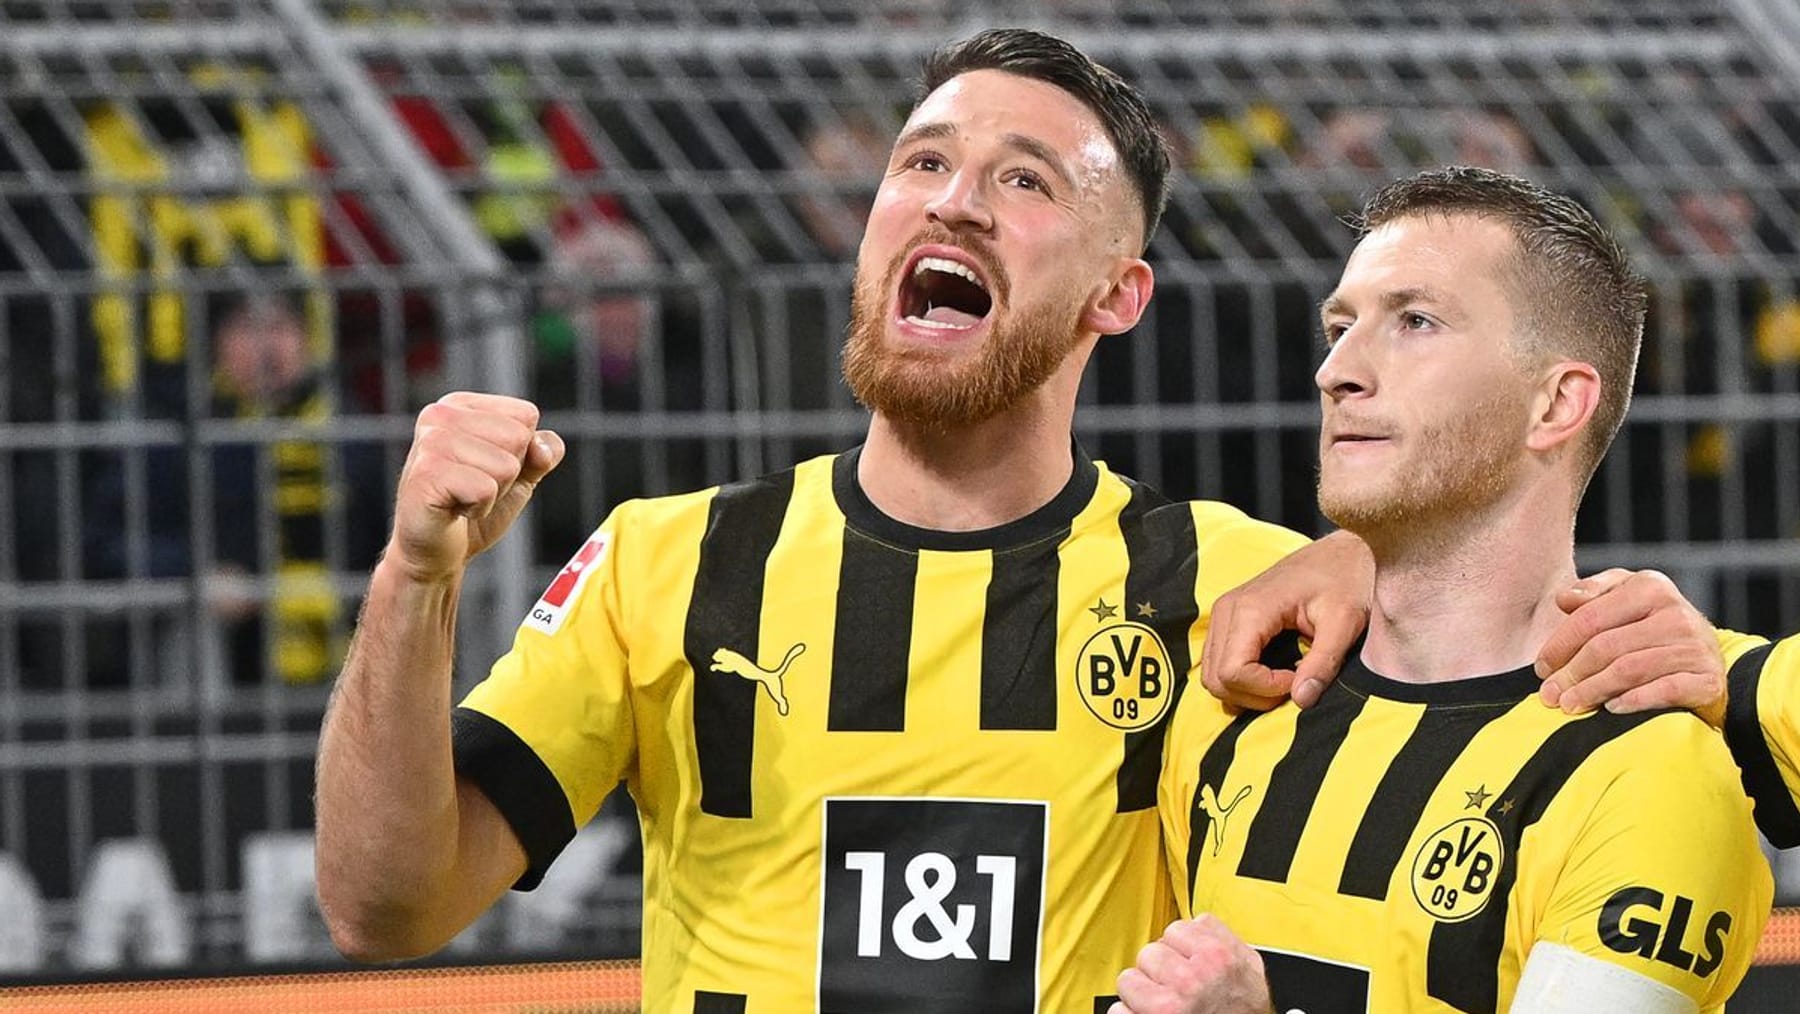 BVB captain Marco Reus on the title fight: “No one is going crazy now!”